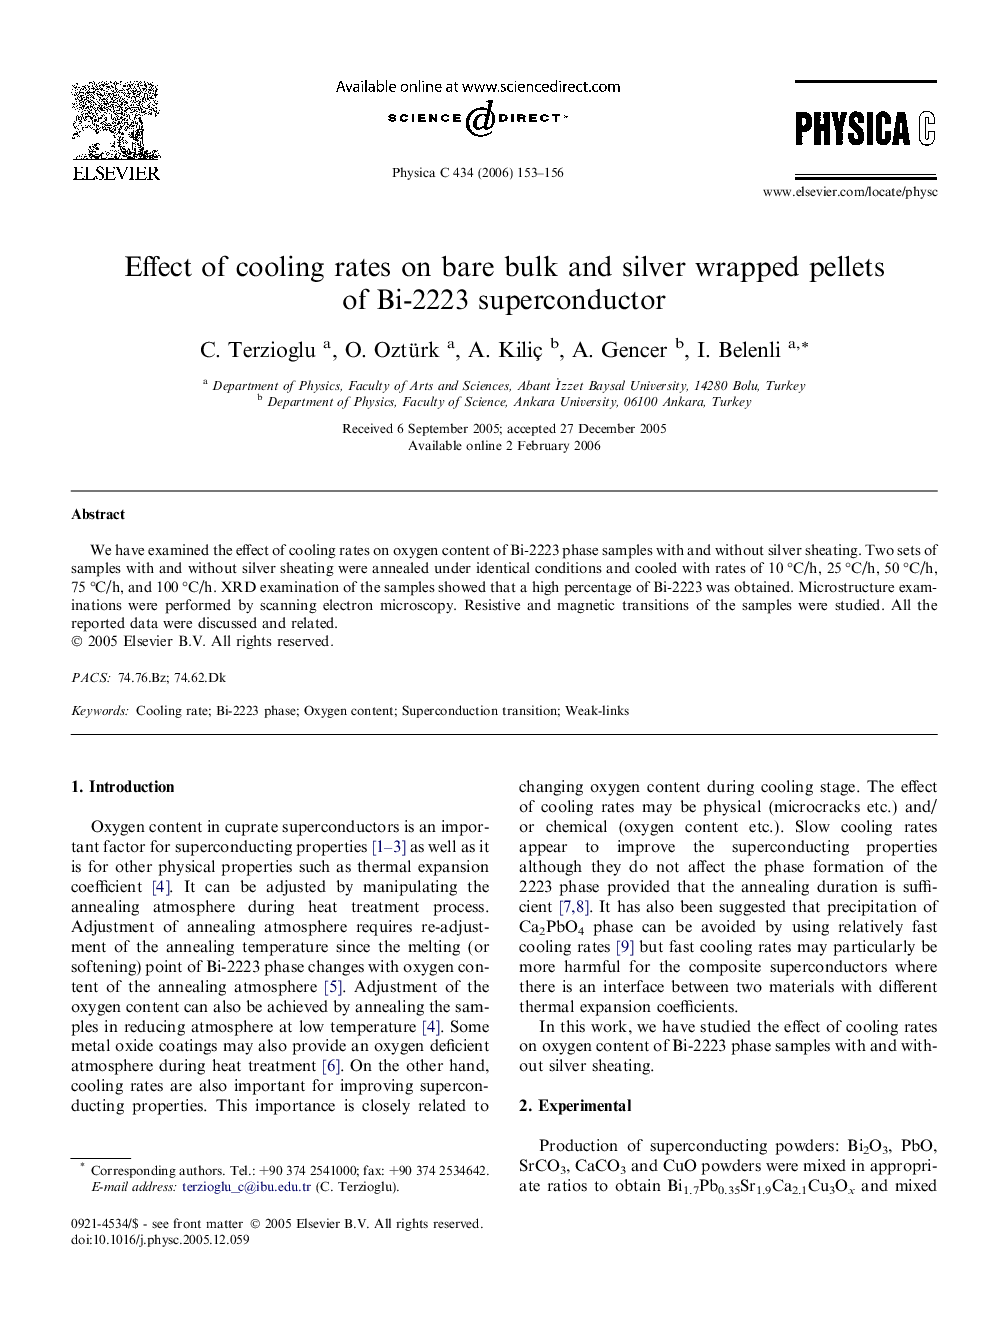 Effect of cooling rates on bare bulk and silver wrapped pellets of Bi-2223 superconductor